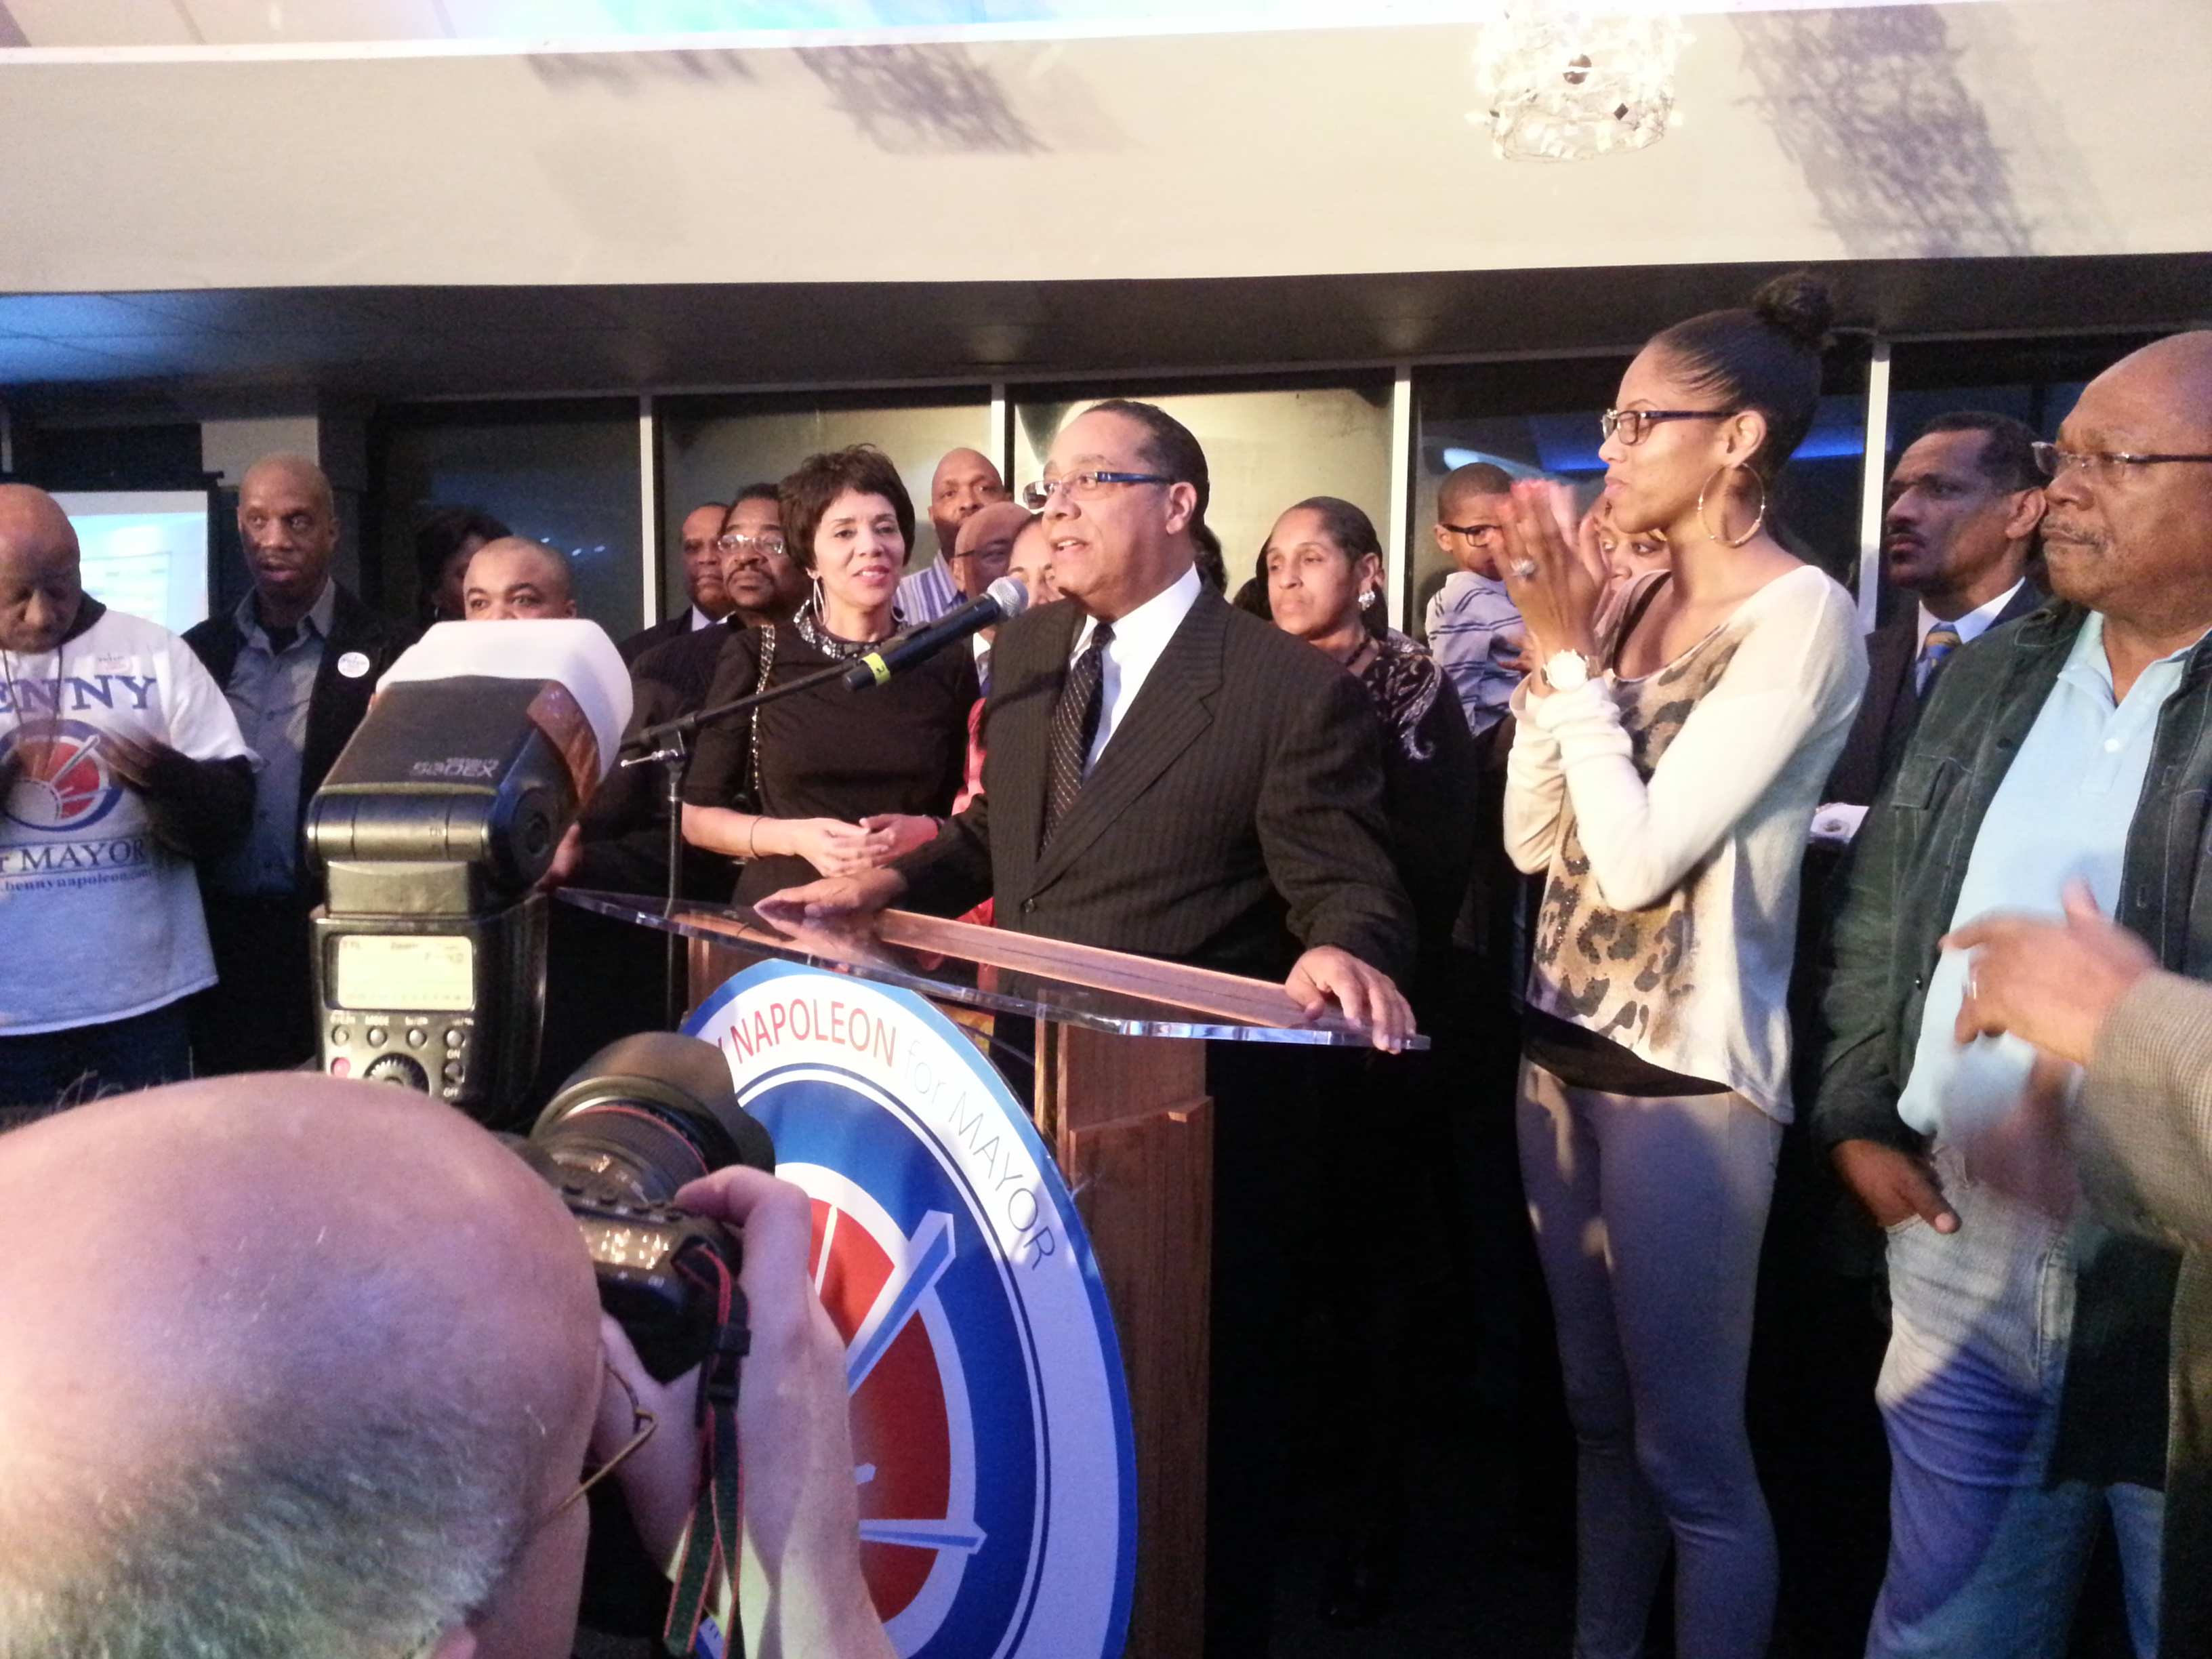 Benny Napoleon concedes to Mike Duggan in Detroit's mayoral election. (Credit: John Hewett/WWJ Newsradio 950)